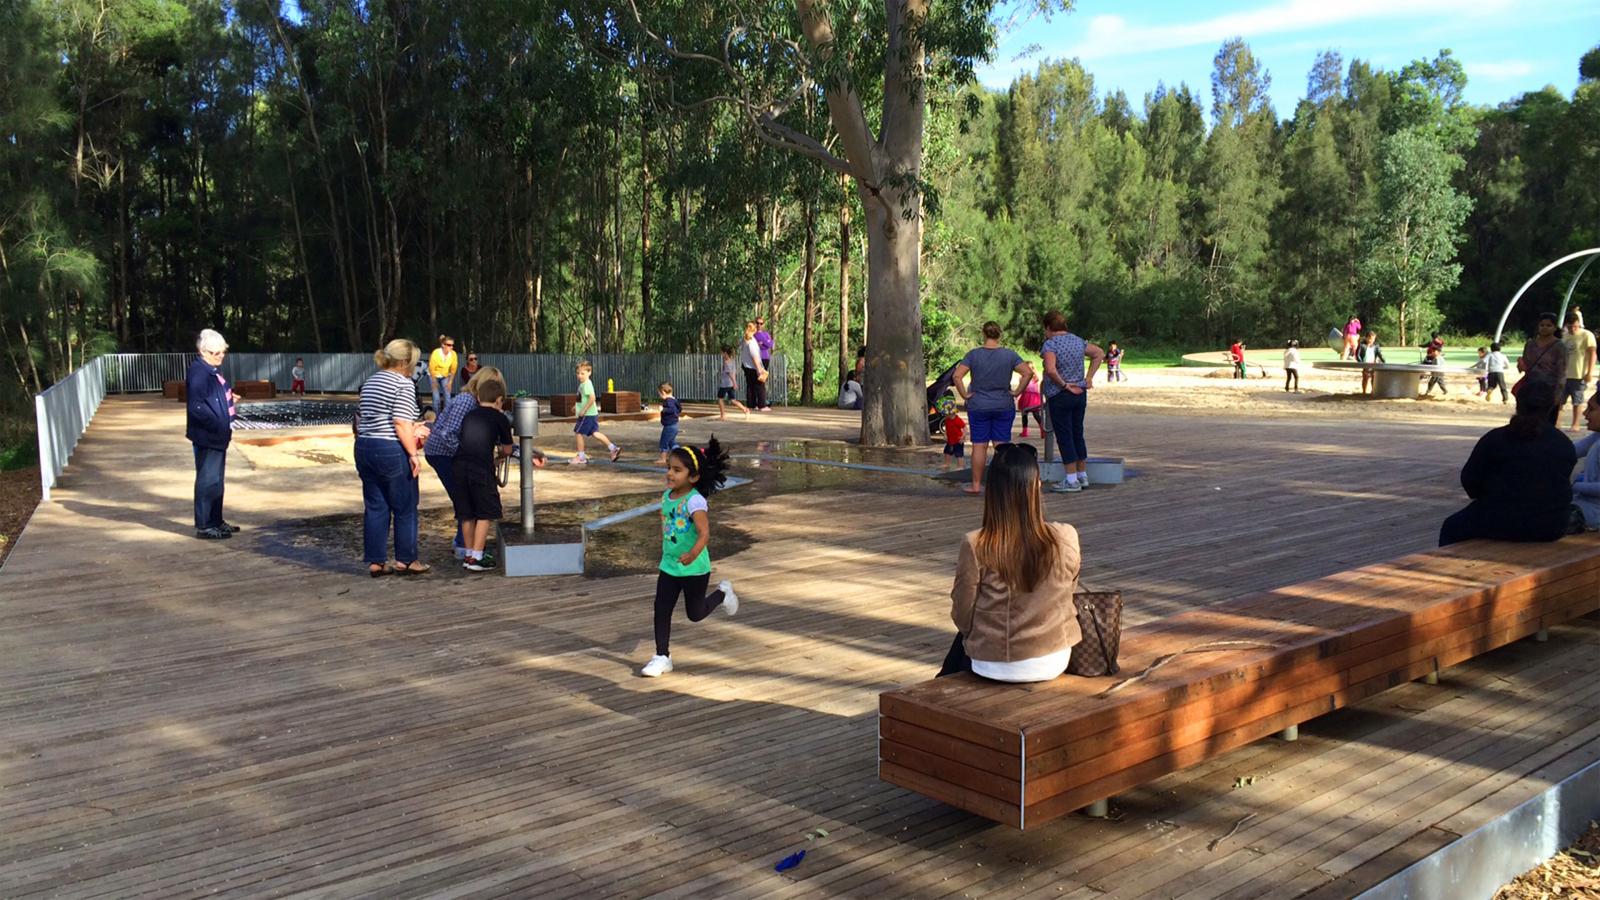 A park scene within a vibrant precinct has people engaged in various activities on a wooden deck. Children are running, playing, and interacting with sandbox features. Adults are standing, walking, and sitting on benches. Trees and greenery surround the area beneath the clear, sunny sky.